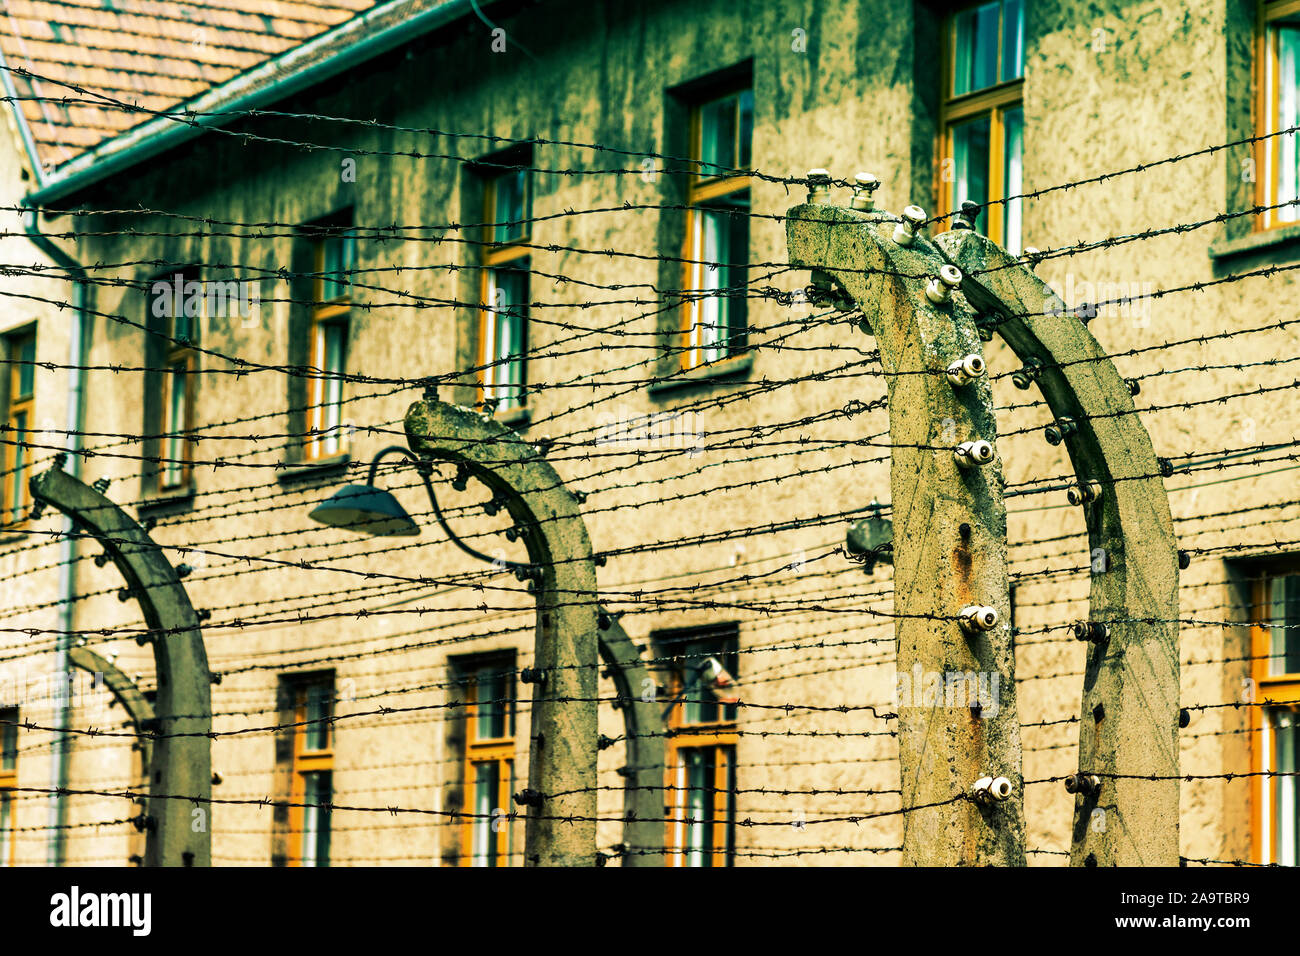 Close-up of barbwire fences for preventing prisoners from escaping at Auschwitz i concentration camp, Poland Stock Photo